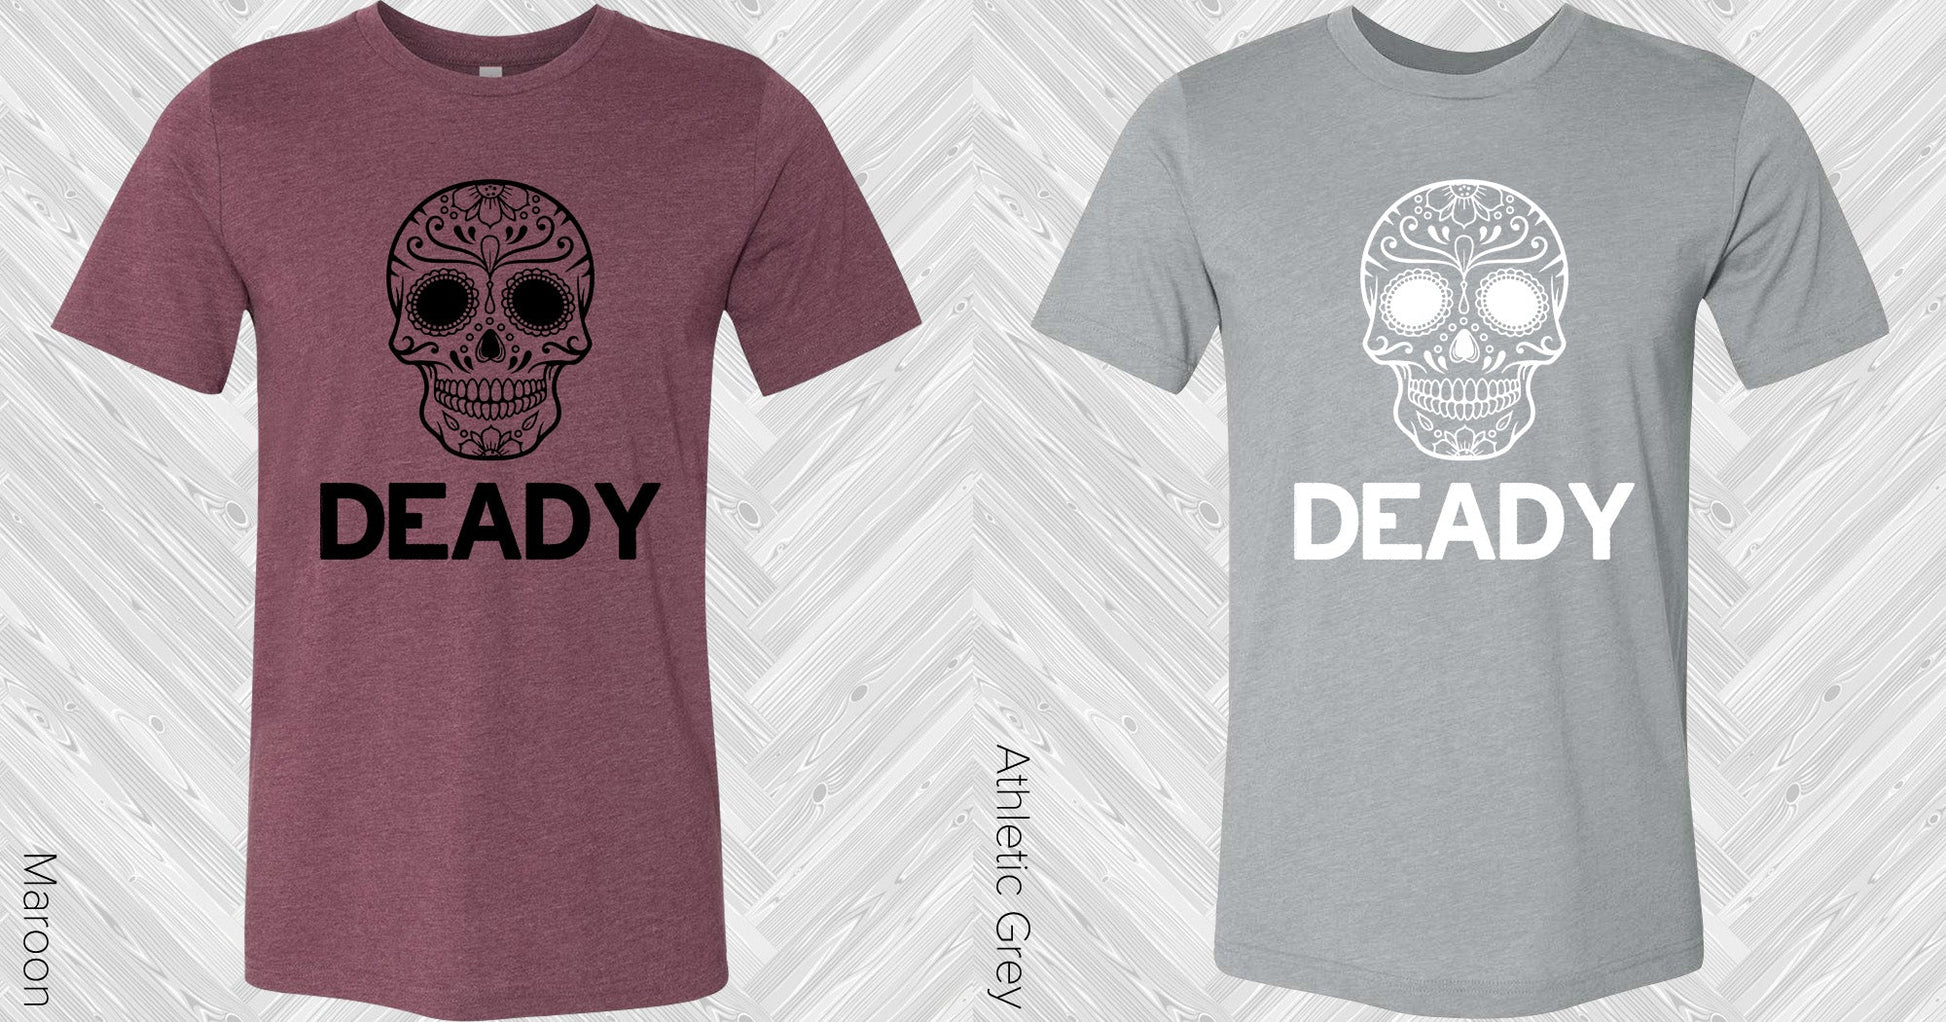 Deady Graphic Tee Graphic Tee